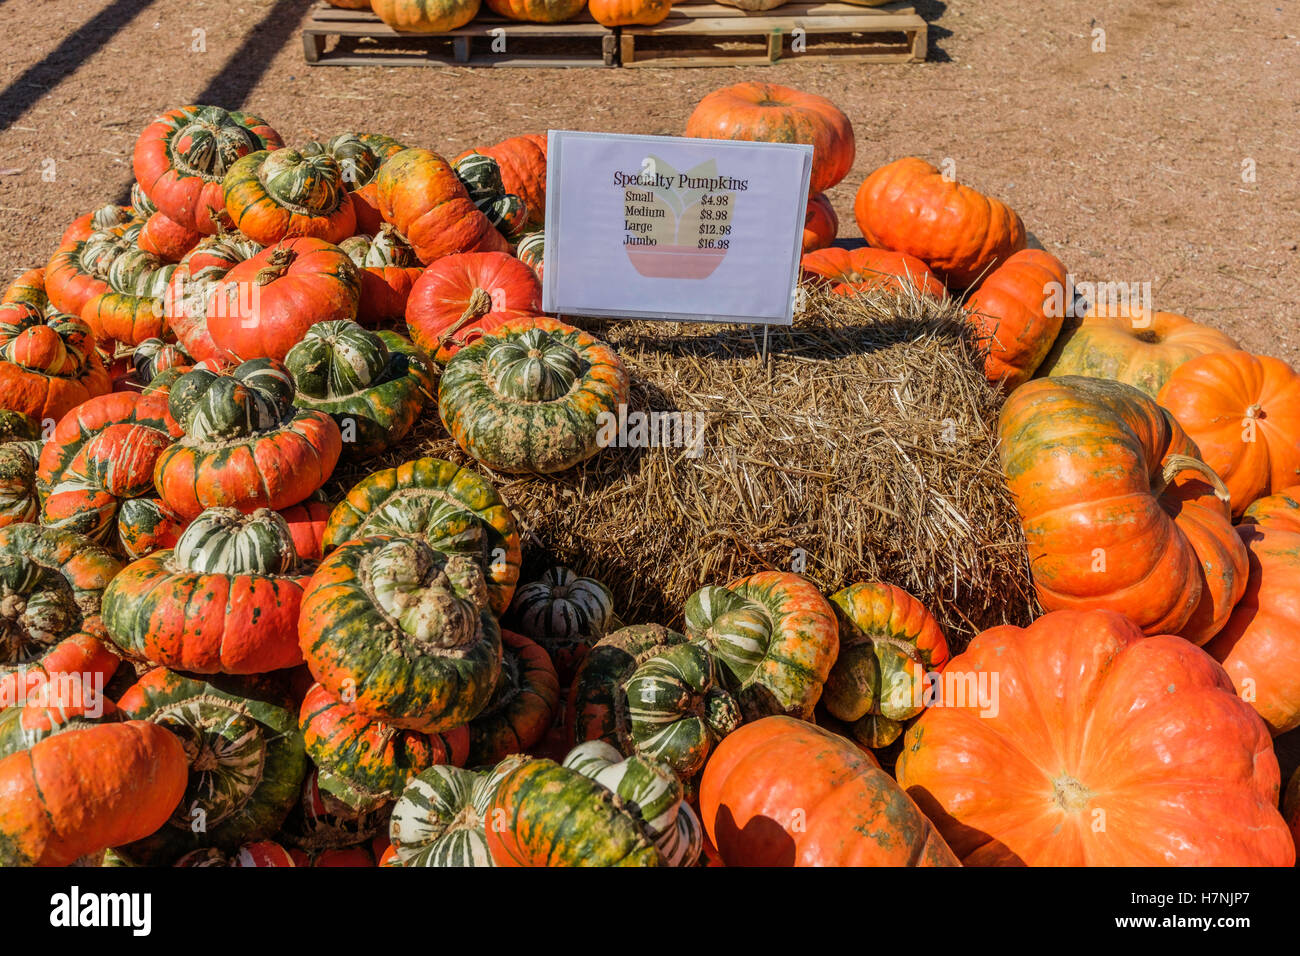 Specialty pumpkins for sale in the autumn, outdoor market. USA. Stock Photo